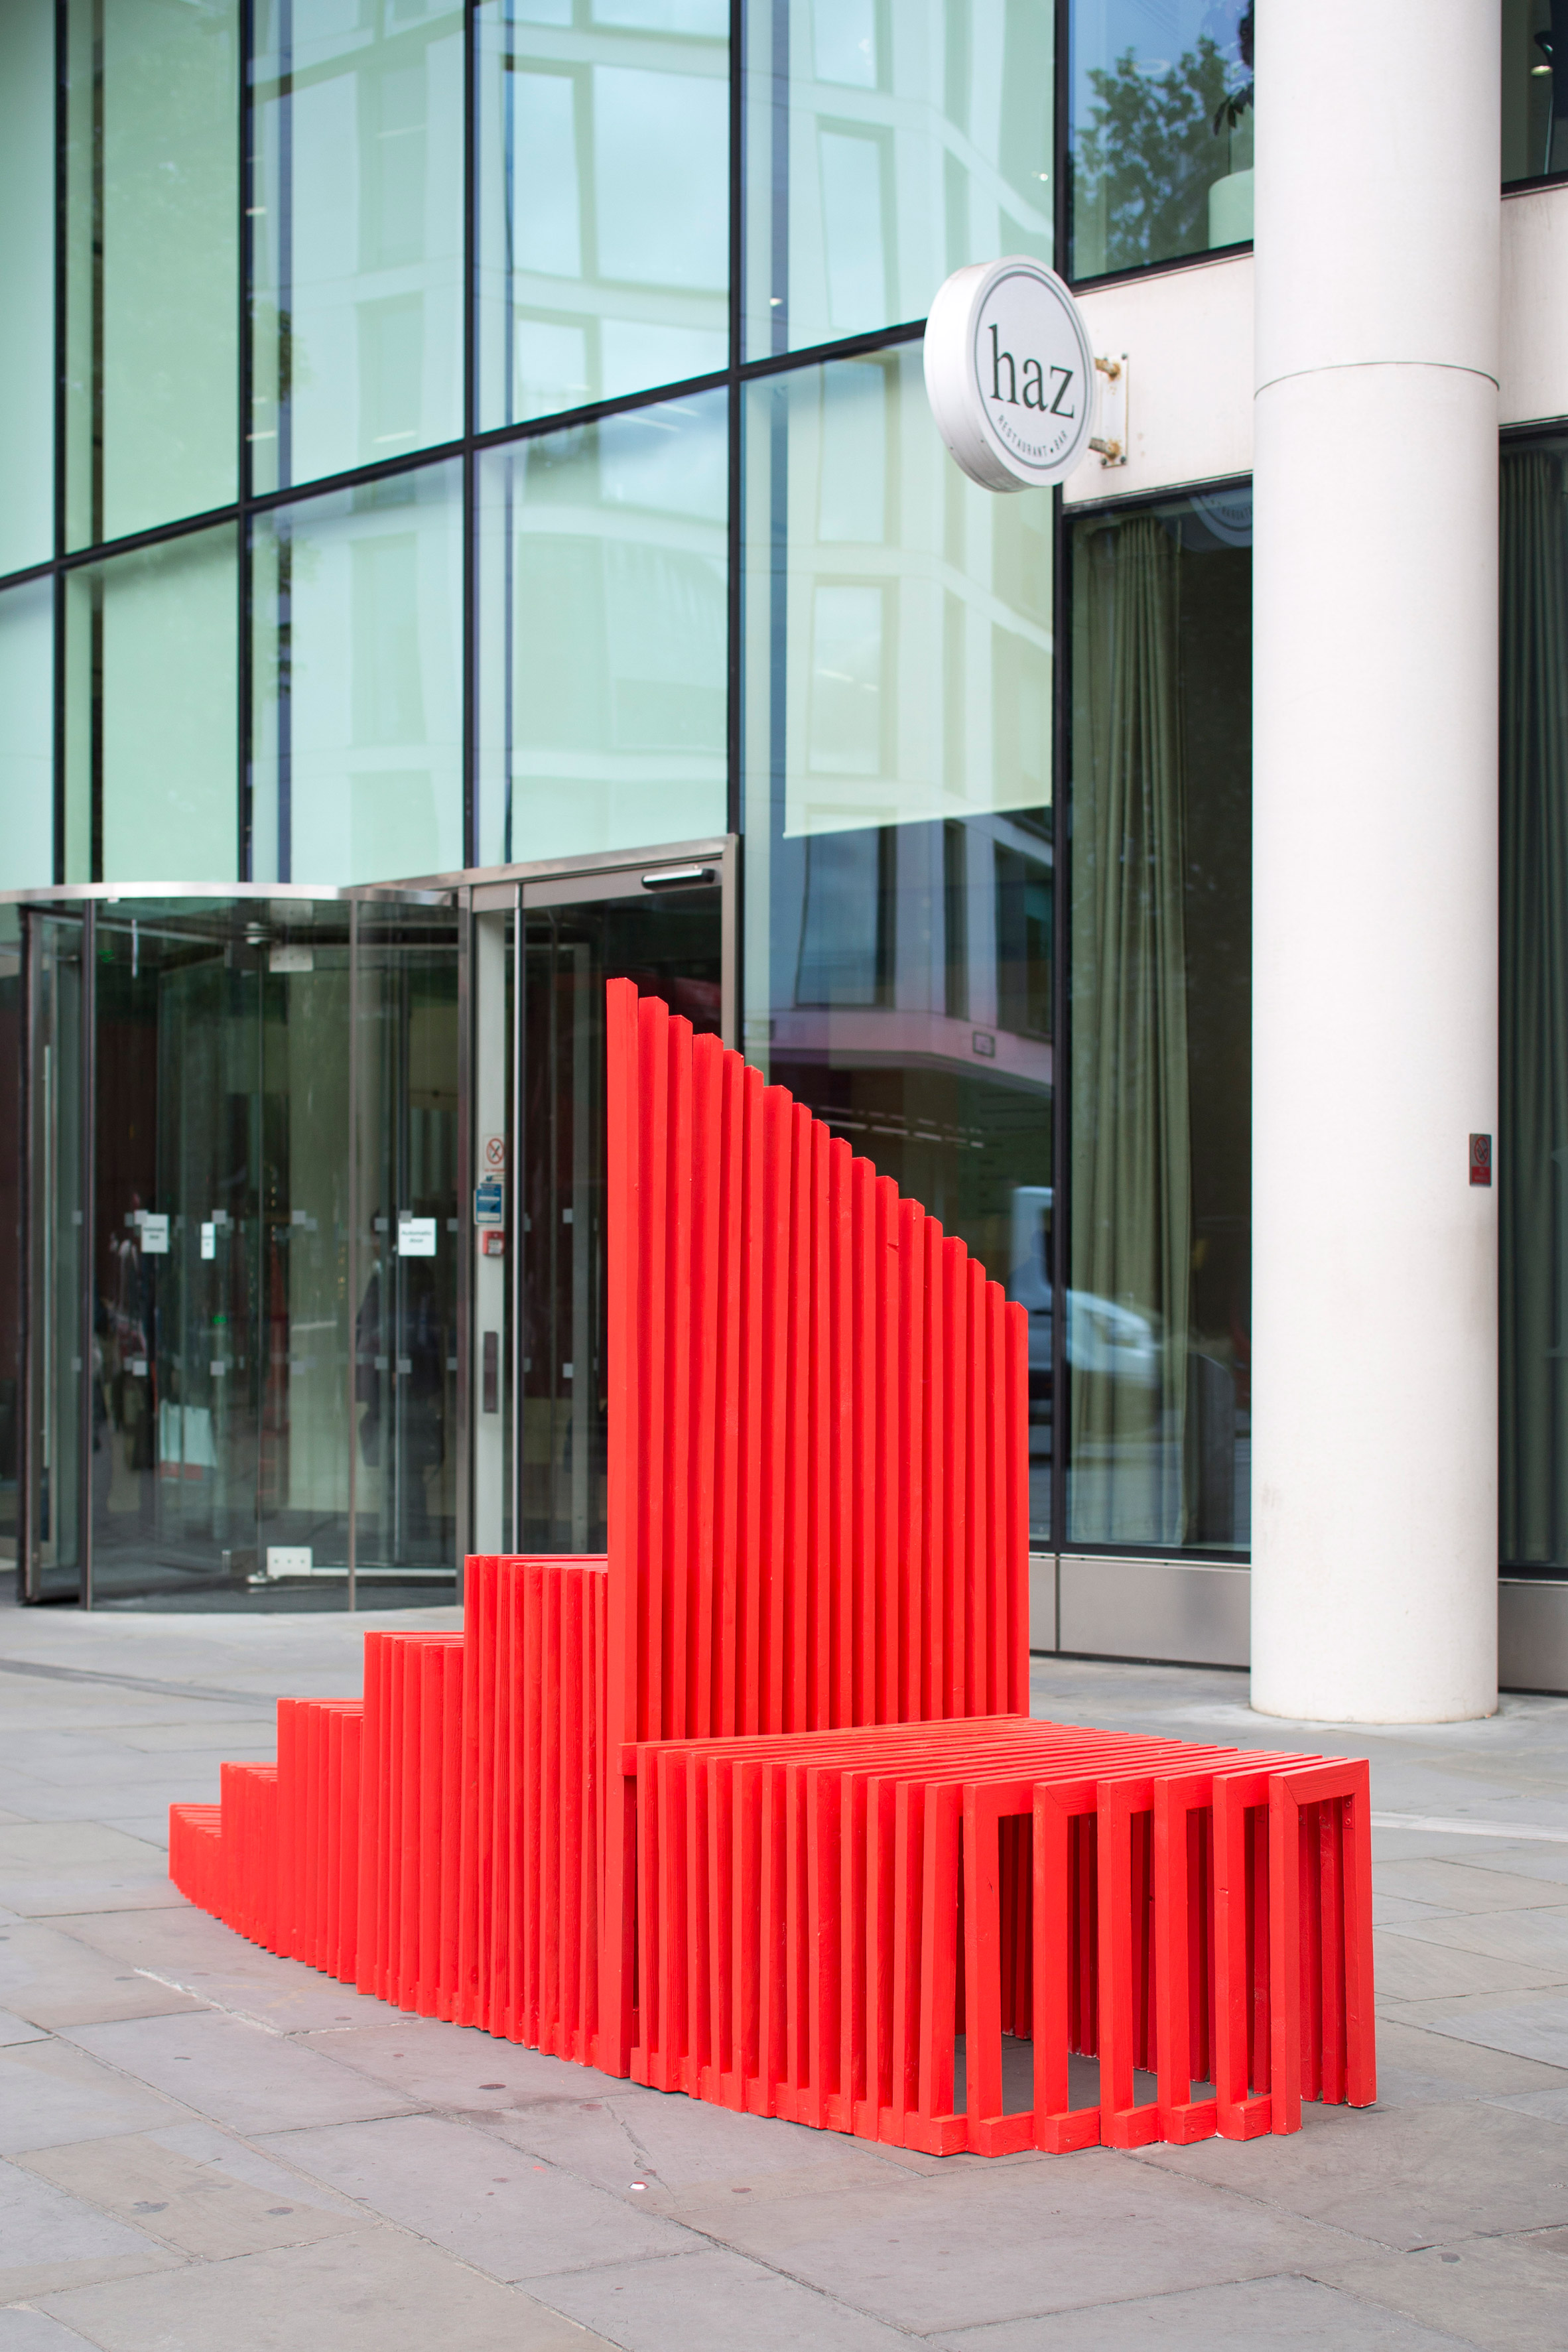 City Benches: Benchtime by Anna Janiak at London Festival of Architecture 